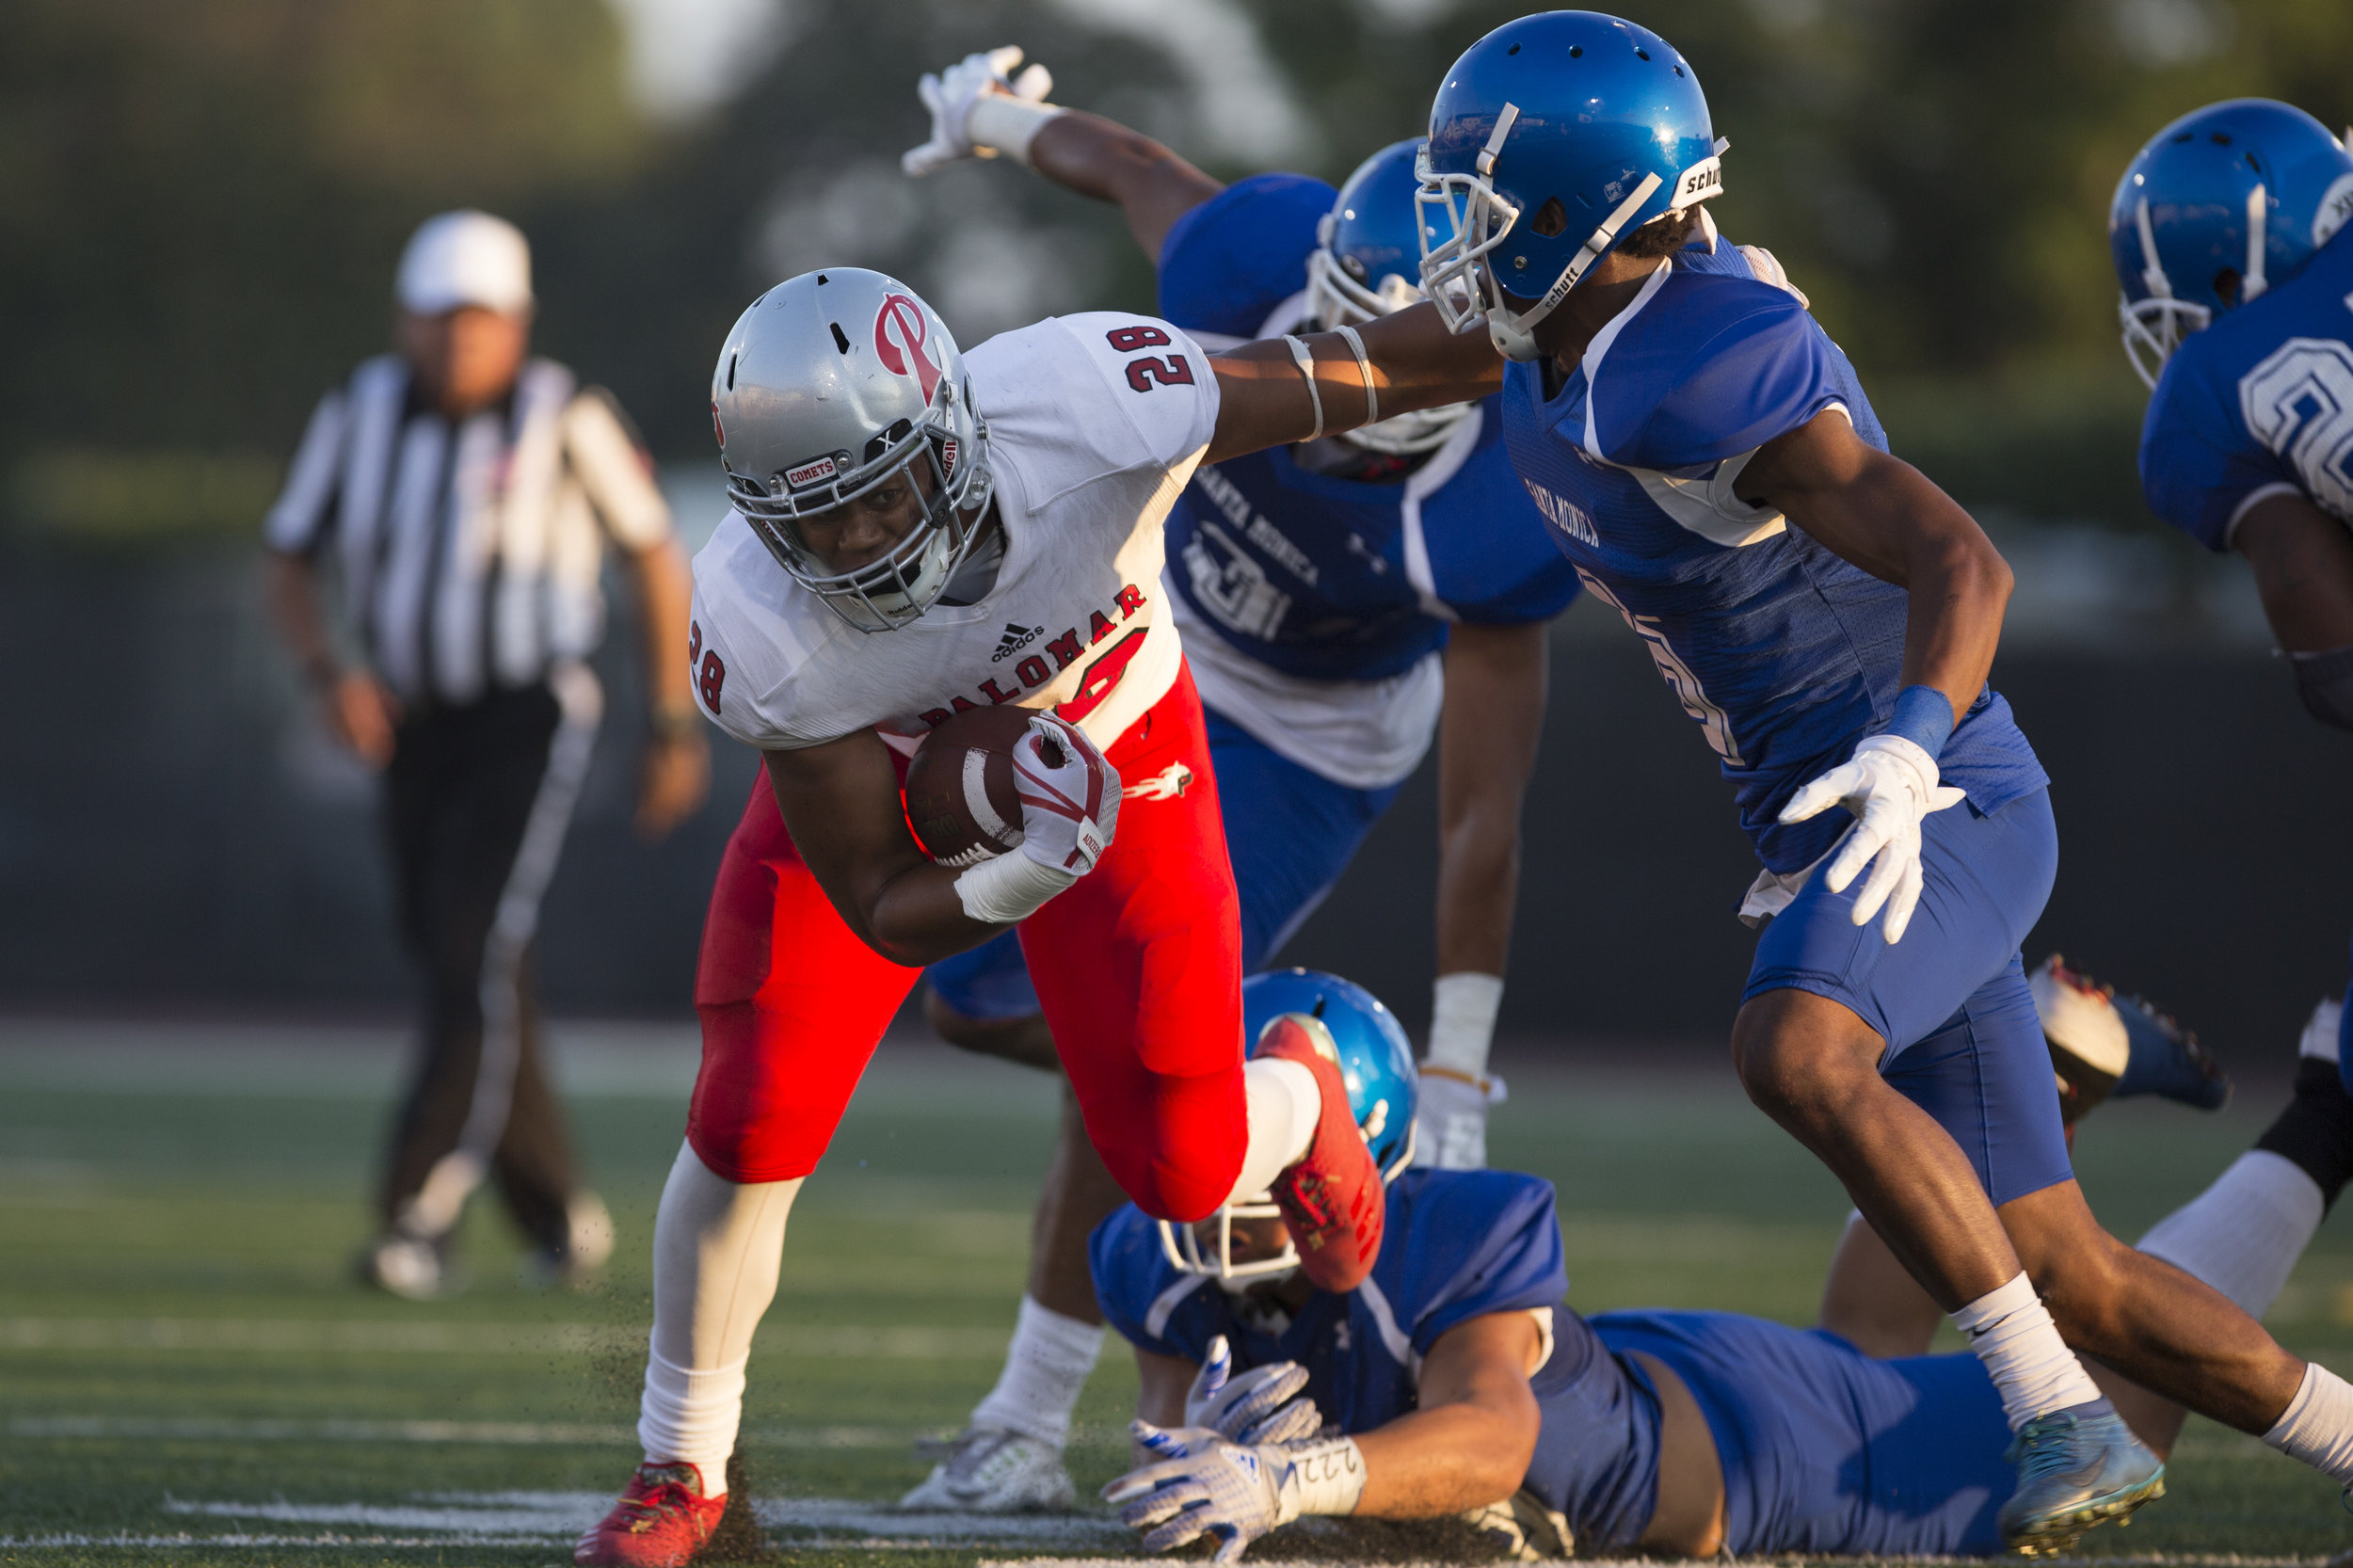  Santa Monica College Corsair Tyree Fryer (DB)(6)(right) attempts to tackle Palomar College Comet Currie Thomason (RB)(28)(left) on September 10, 2017 on the Corsair Field at Santa Monica College in Santa Monica, California. The Corsairs lose to the 